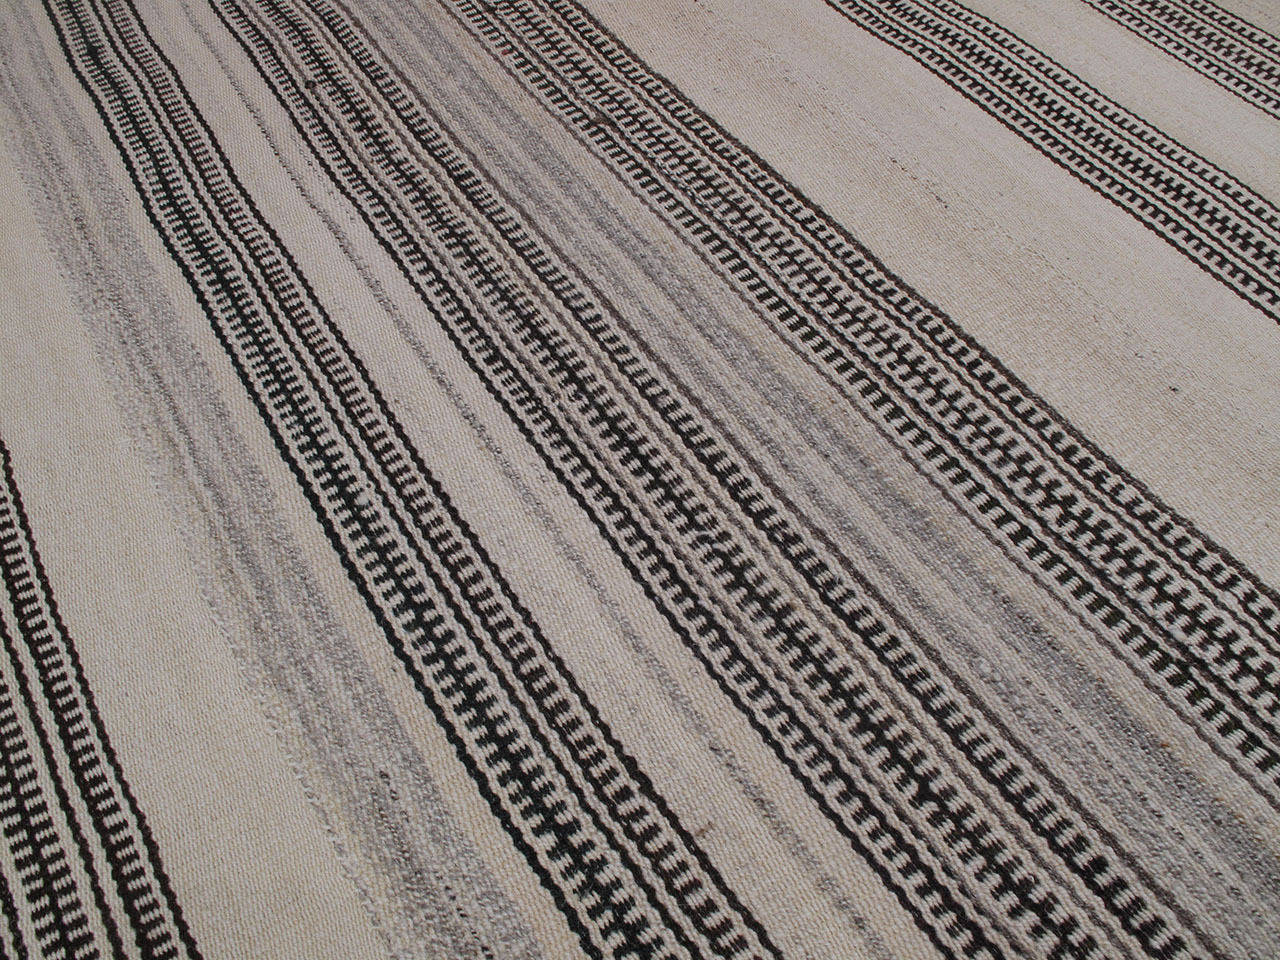 Hand-Woven Striped Kilim in Natural Tones